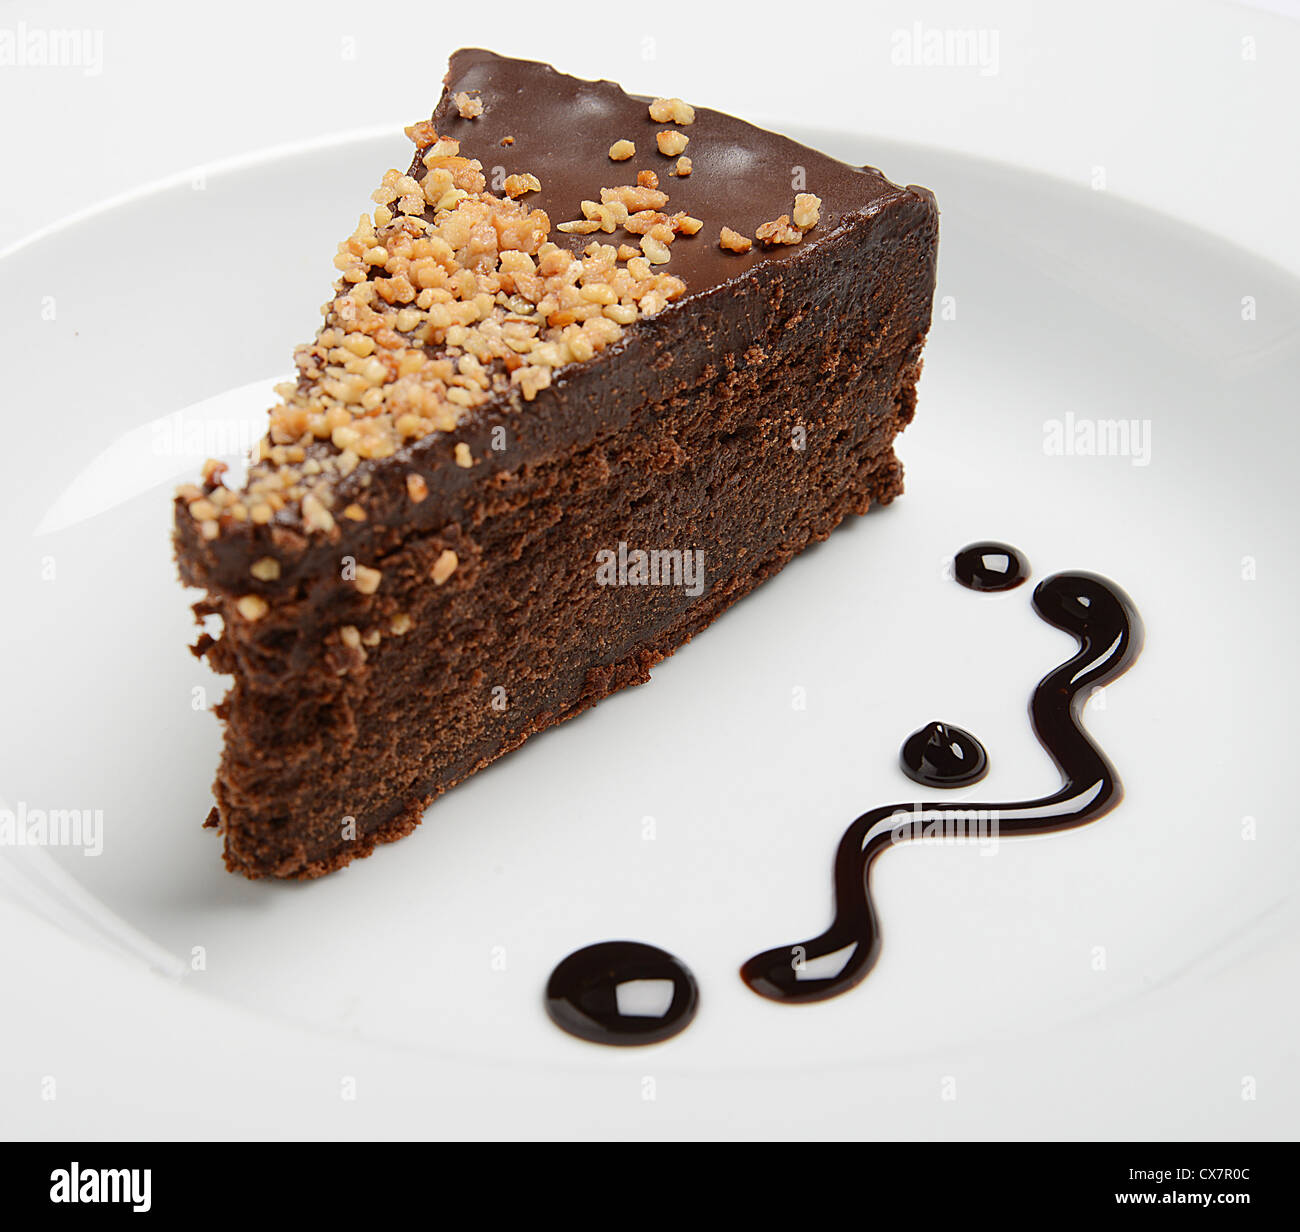 Chocolate Cake with nuts on white Stock Photo